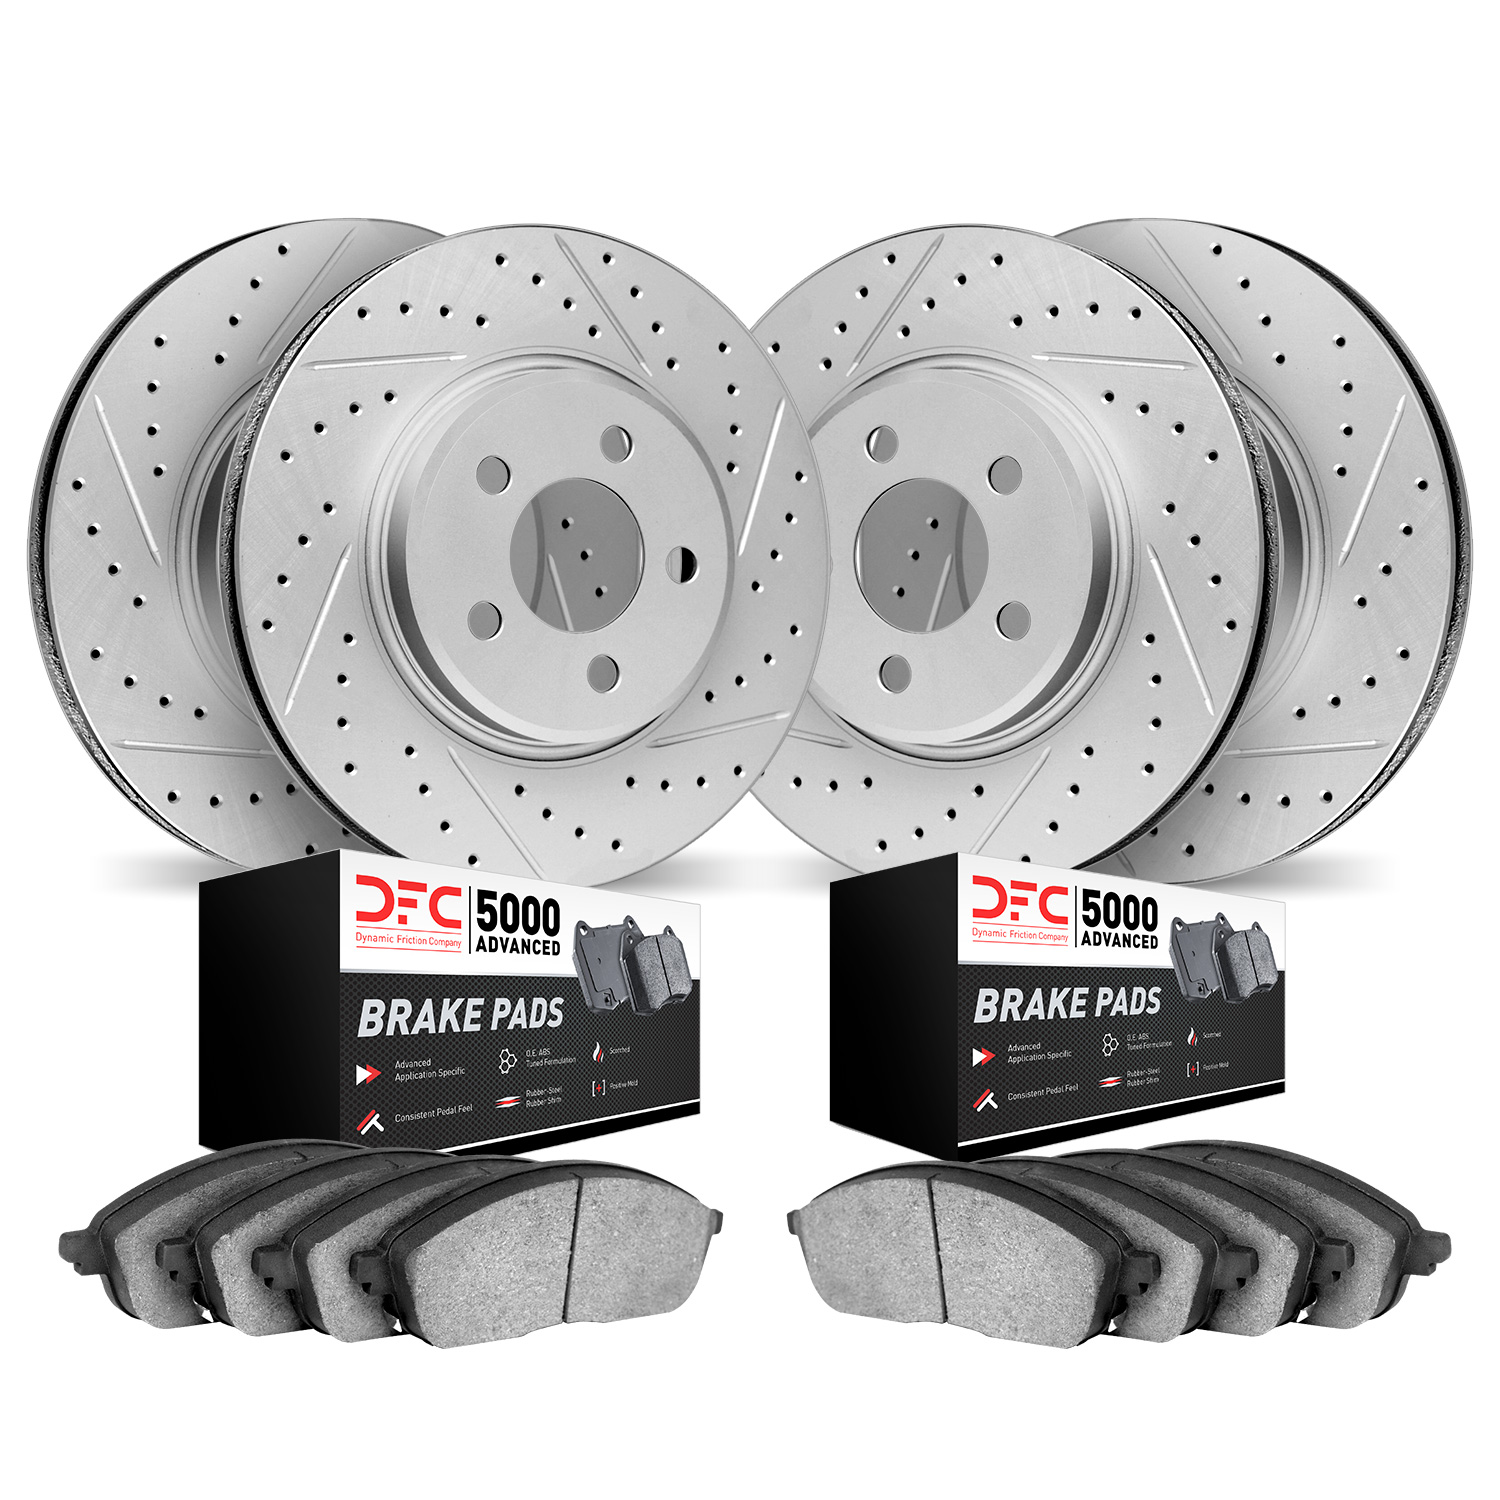 2504-31059 Geoperformance Drilled/Slotted Rotors w/5000 Advanced Brake Pads Kit, Fits Select Mini, Position: Front and Rear